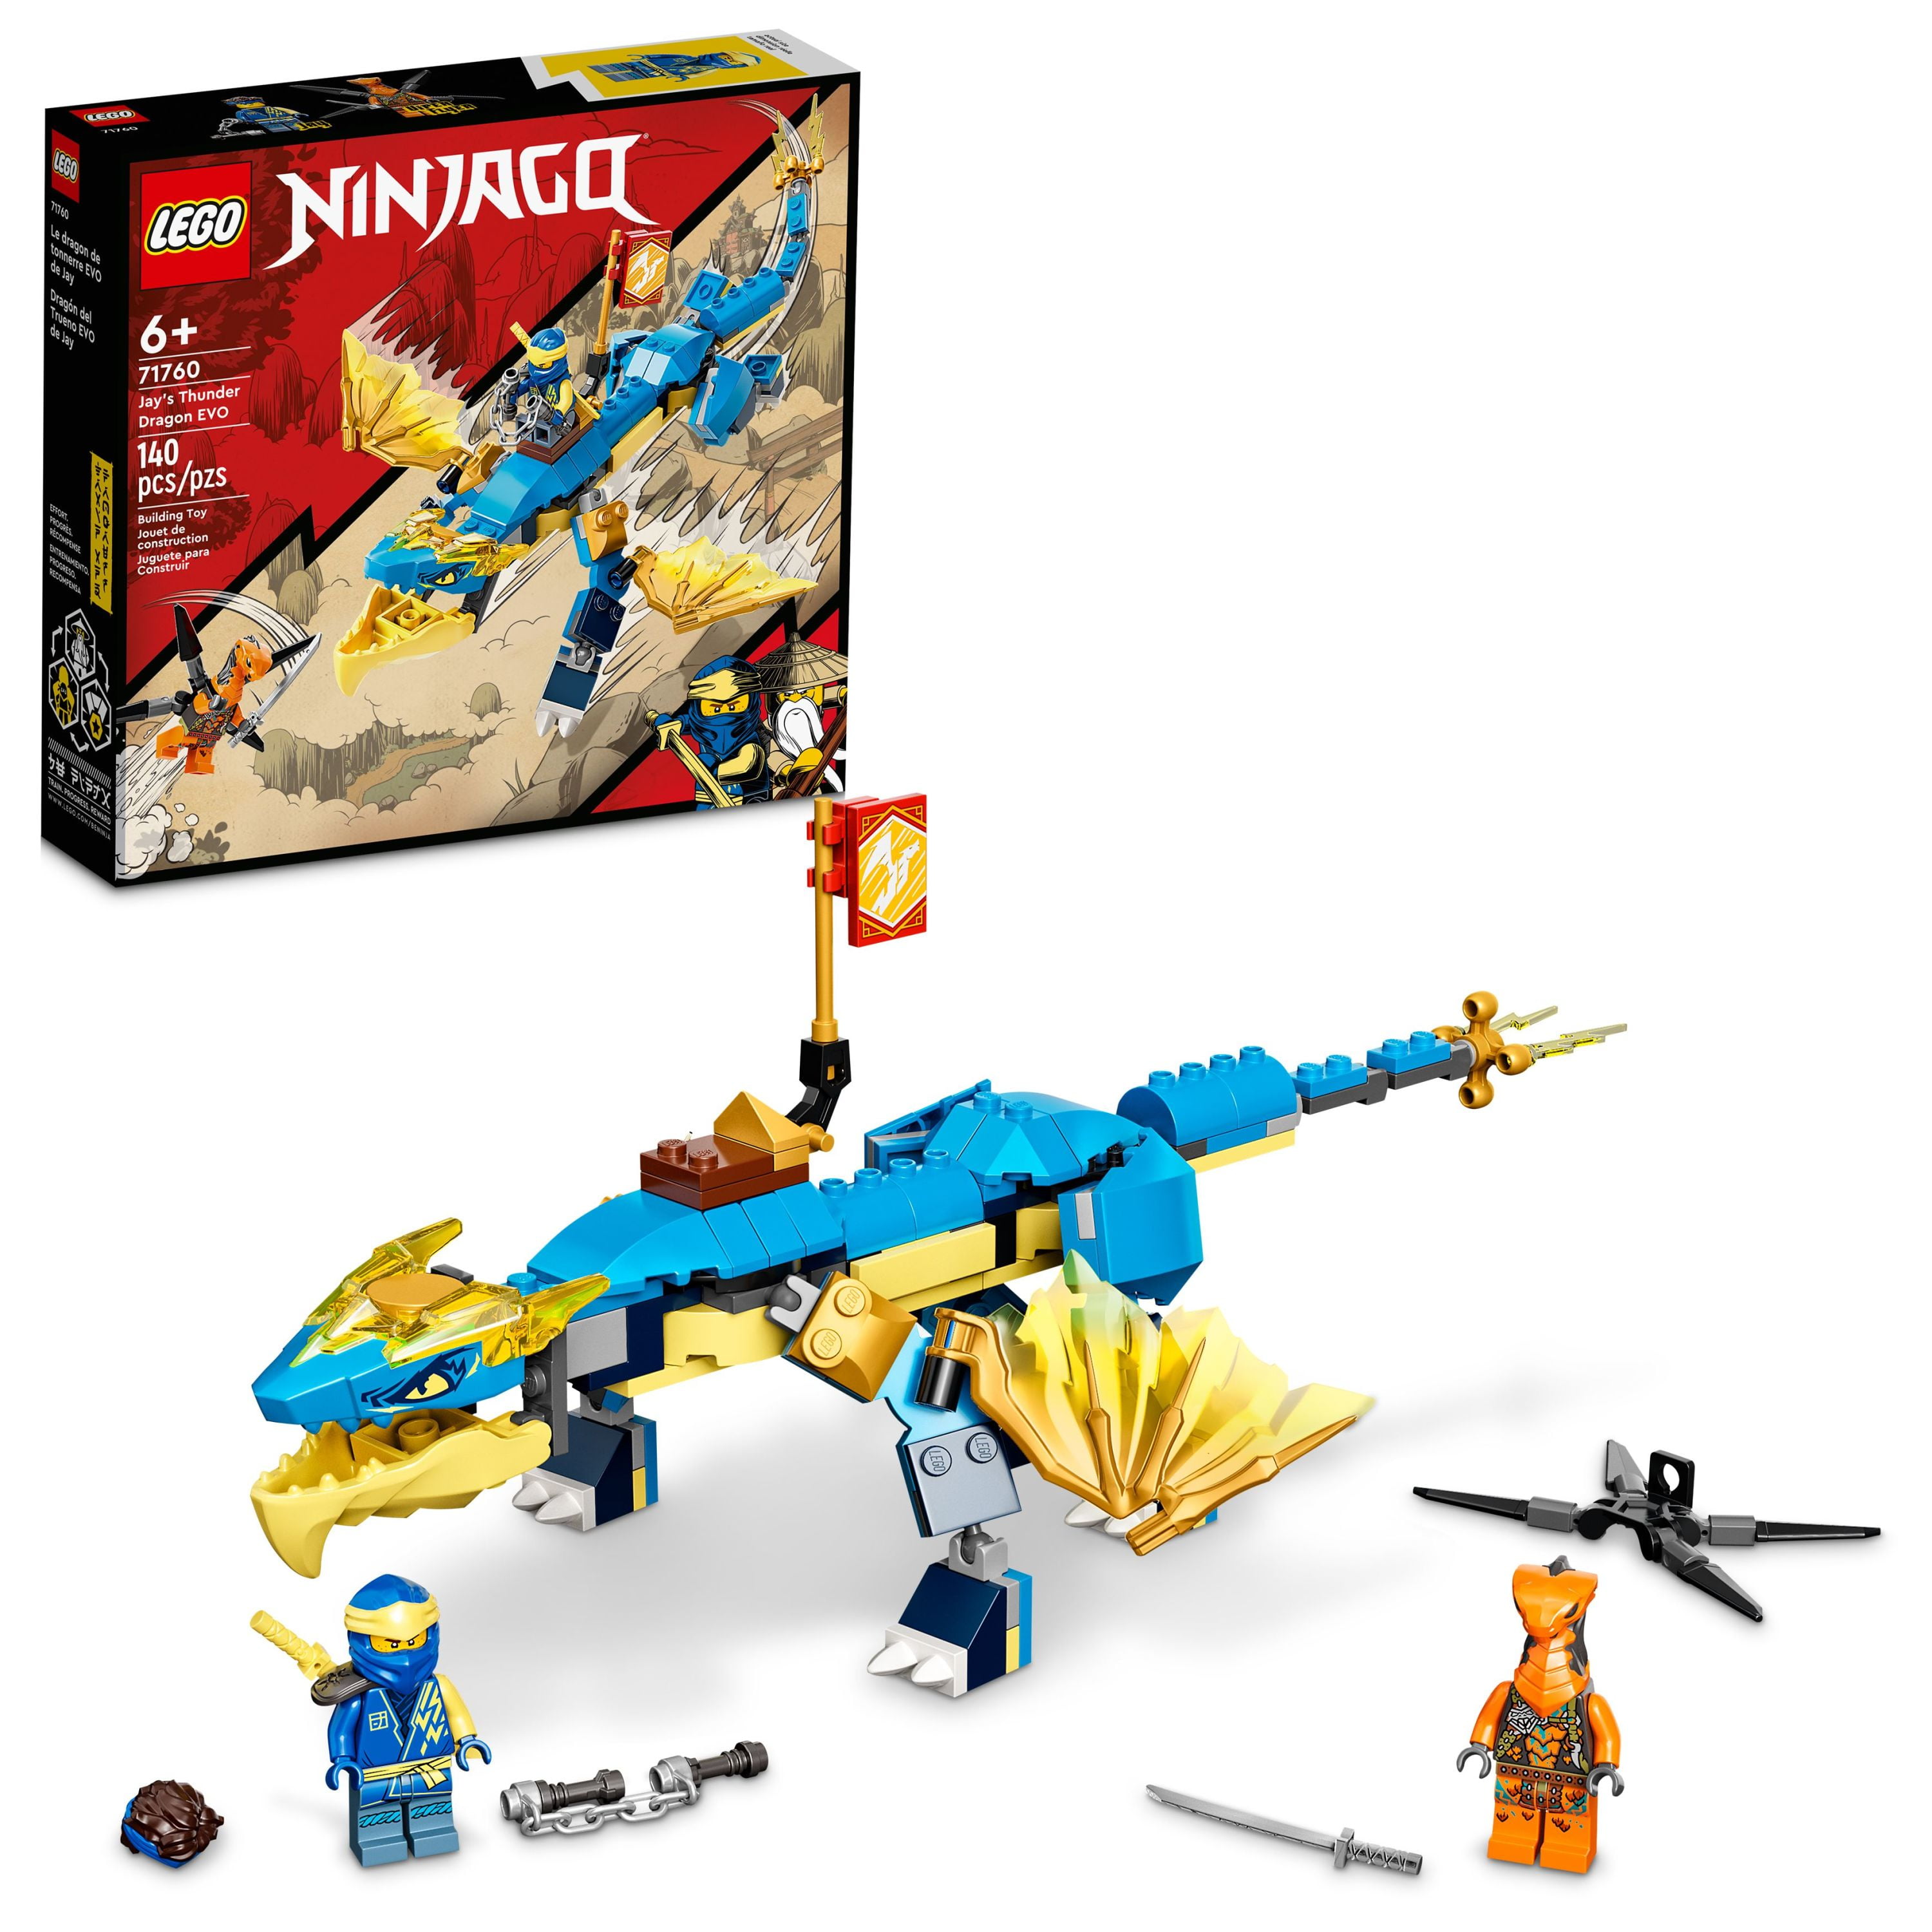 LEGO NINJAGO Jay's Thunder Dragon EVO 71760 - Toy Figure and Viper Snake Set with Minifigures, Collectible Speed Mission Banner, Ninja Battle Adventure, Great Gift for Kids 6 Plus - Walmart.com